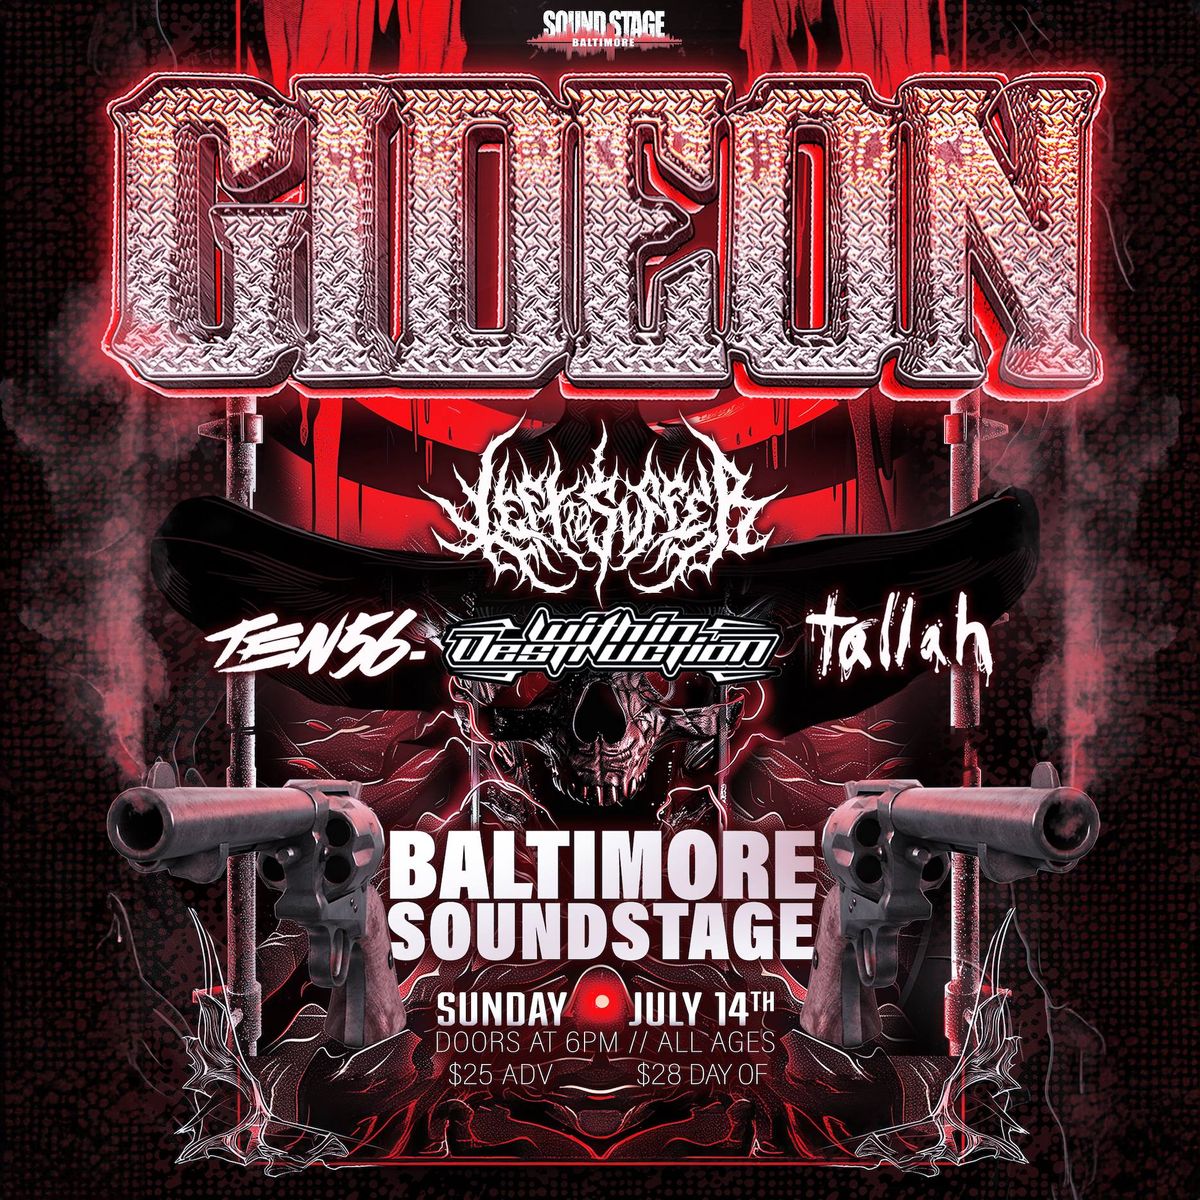 Gideon w\/ Left To Suffer, Within Destruction, Ten56, Tallah at Baltimore Soundstage